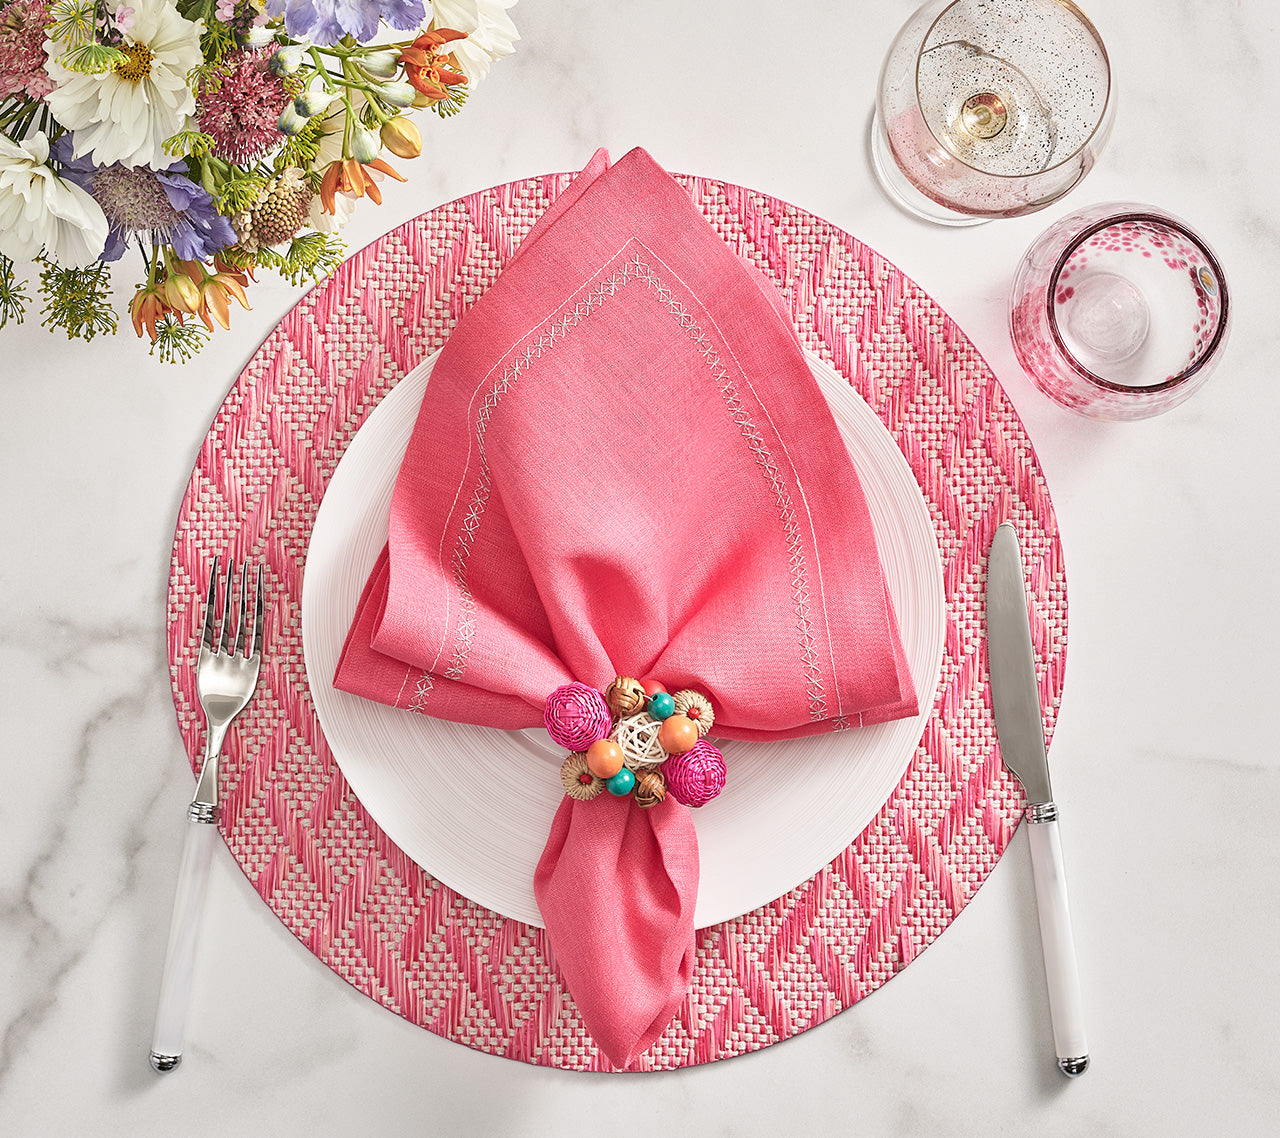 Round Basketweave Placemat in pink